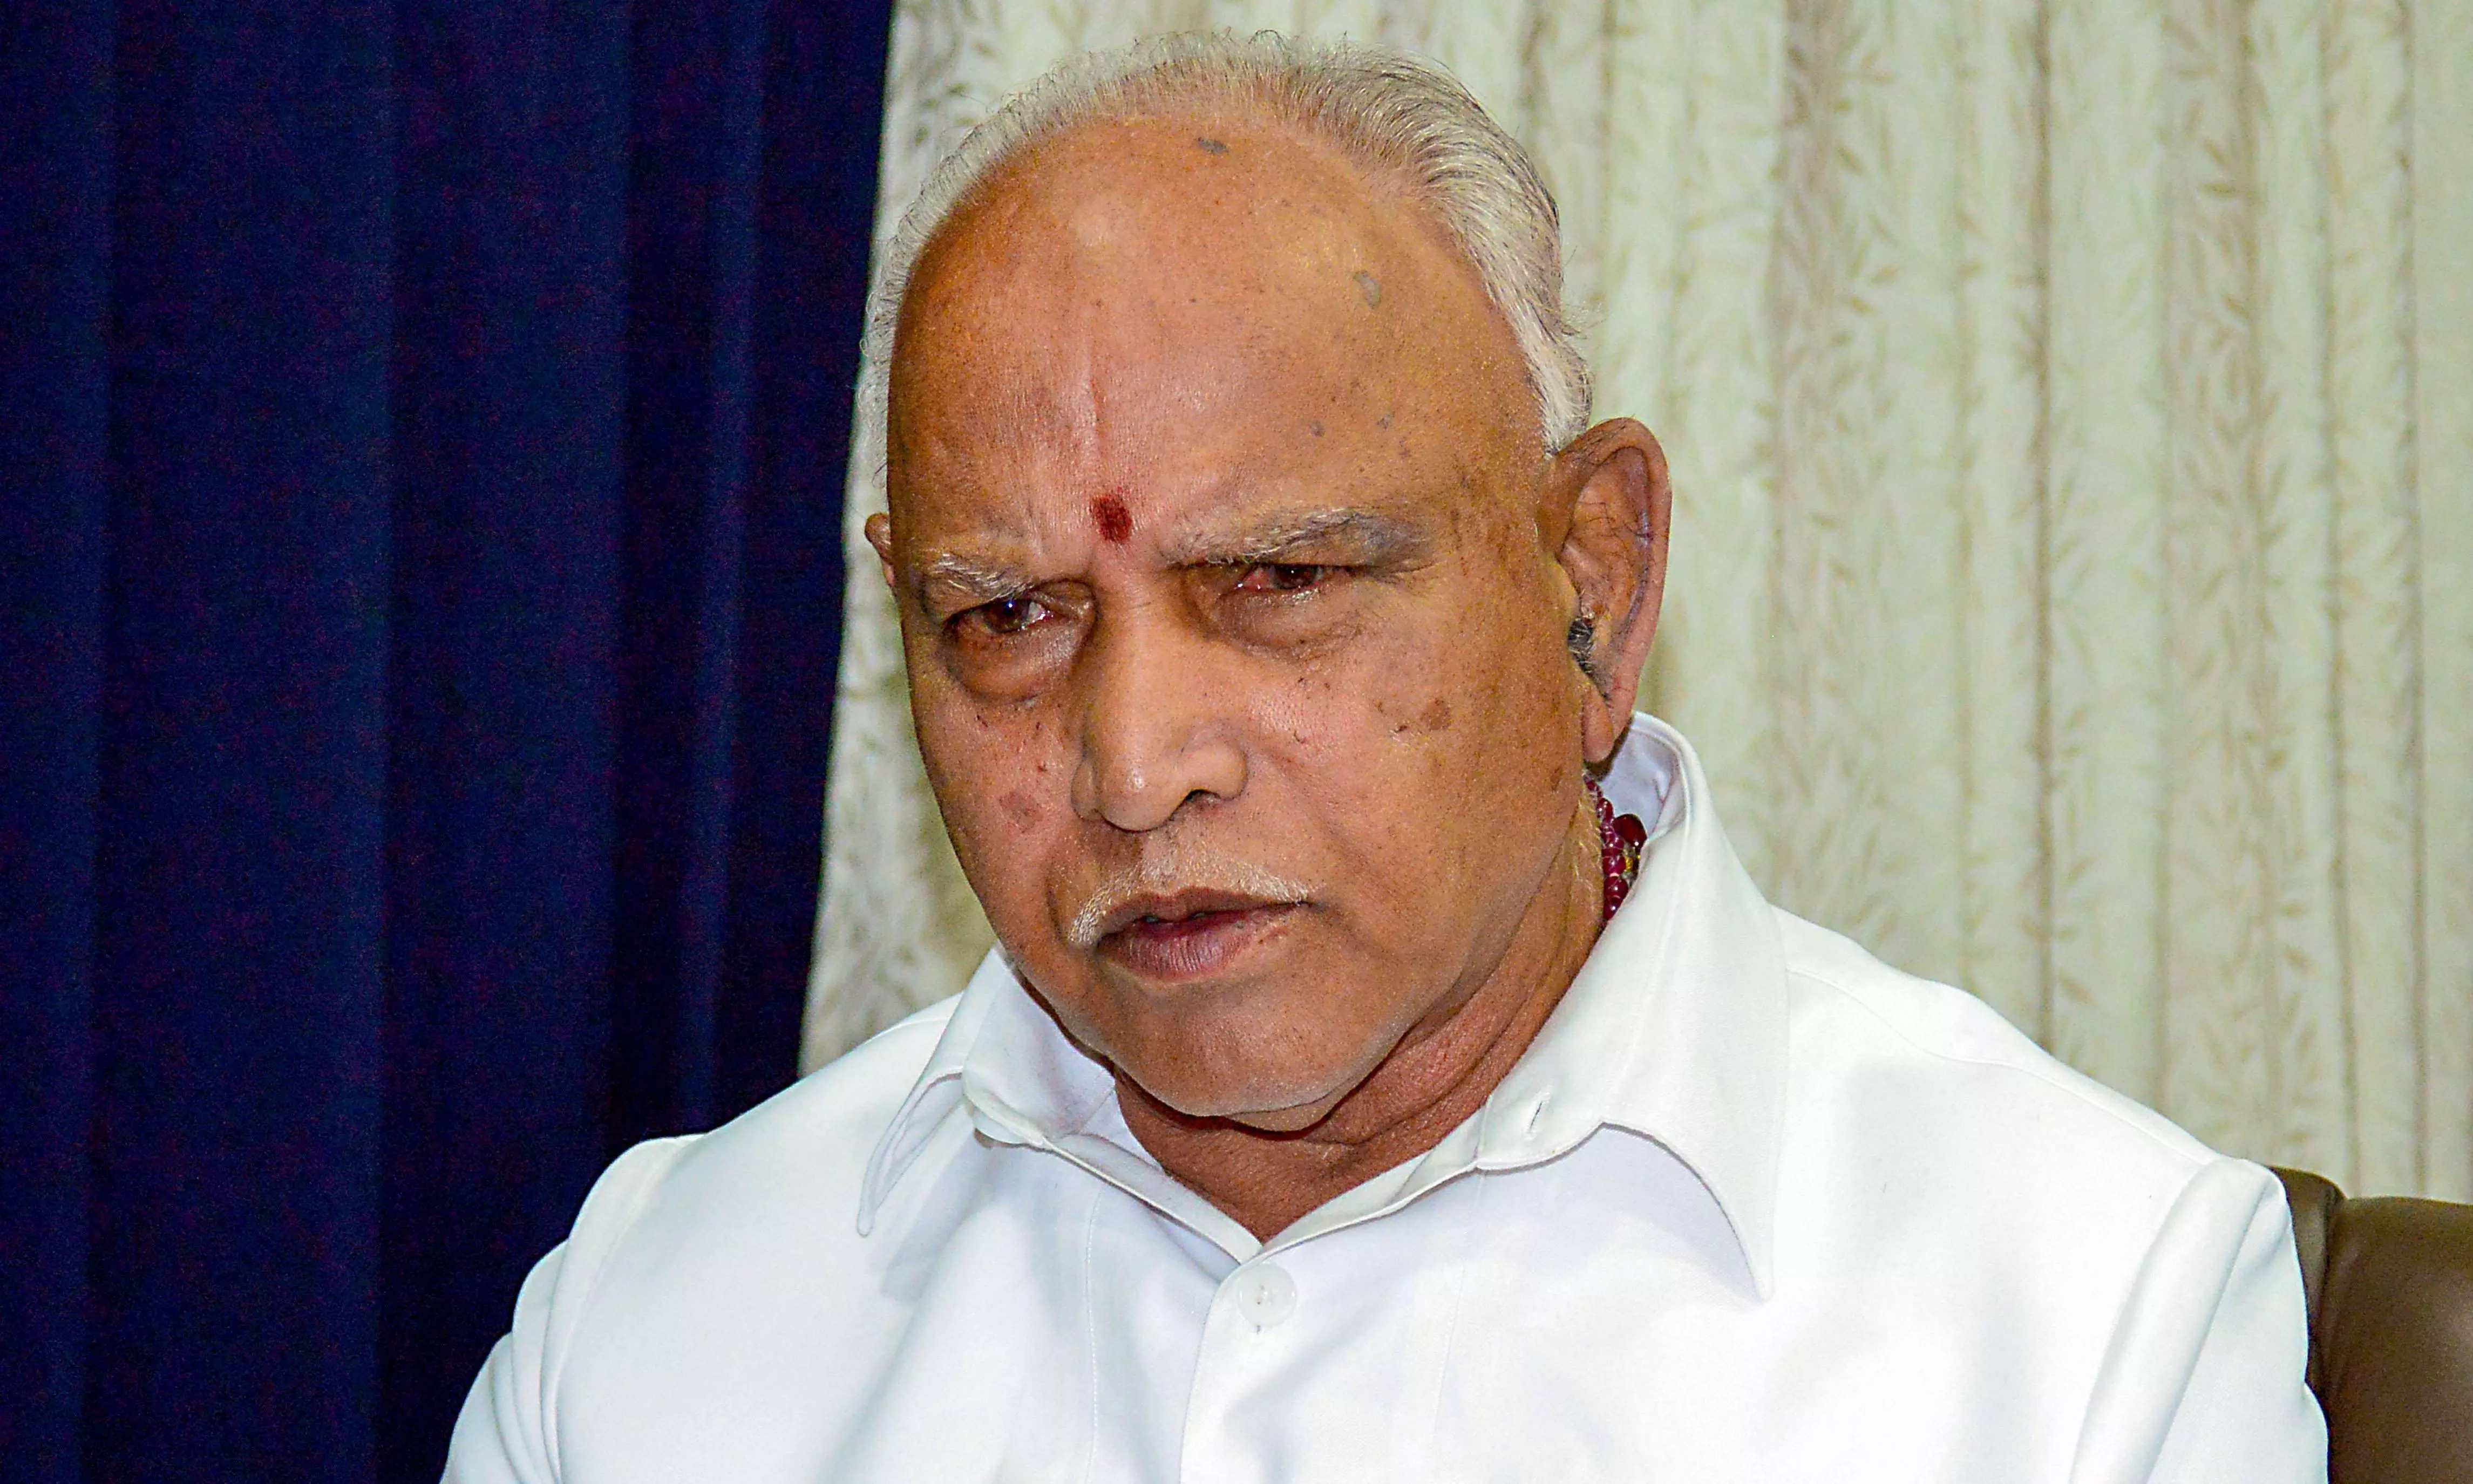 Yediyurappa, Aides Paid Money to Sexual Assault Victim, to Buy Silence: Chargesheet